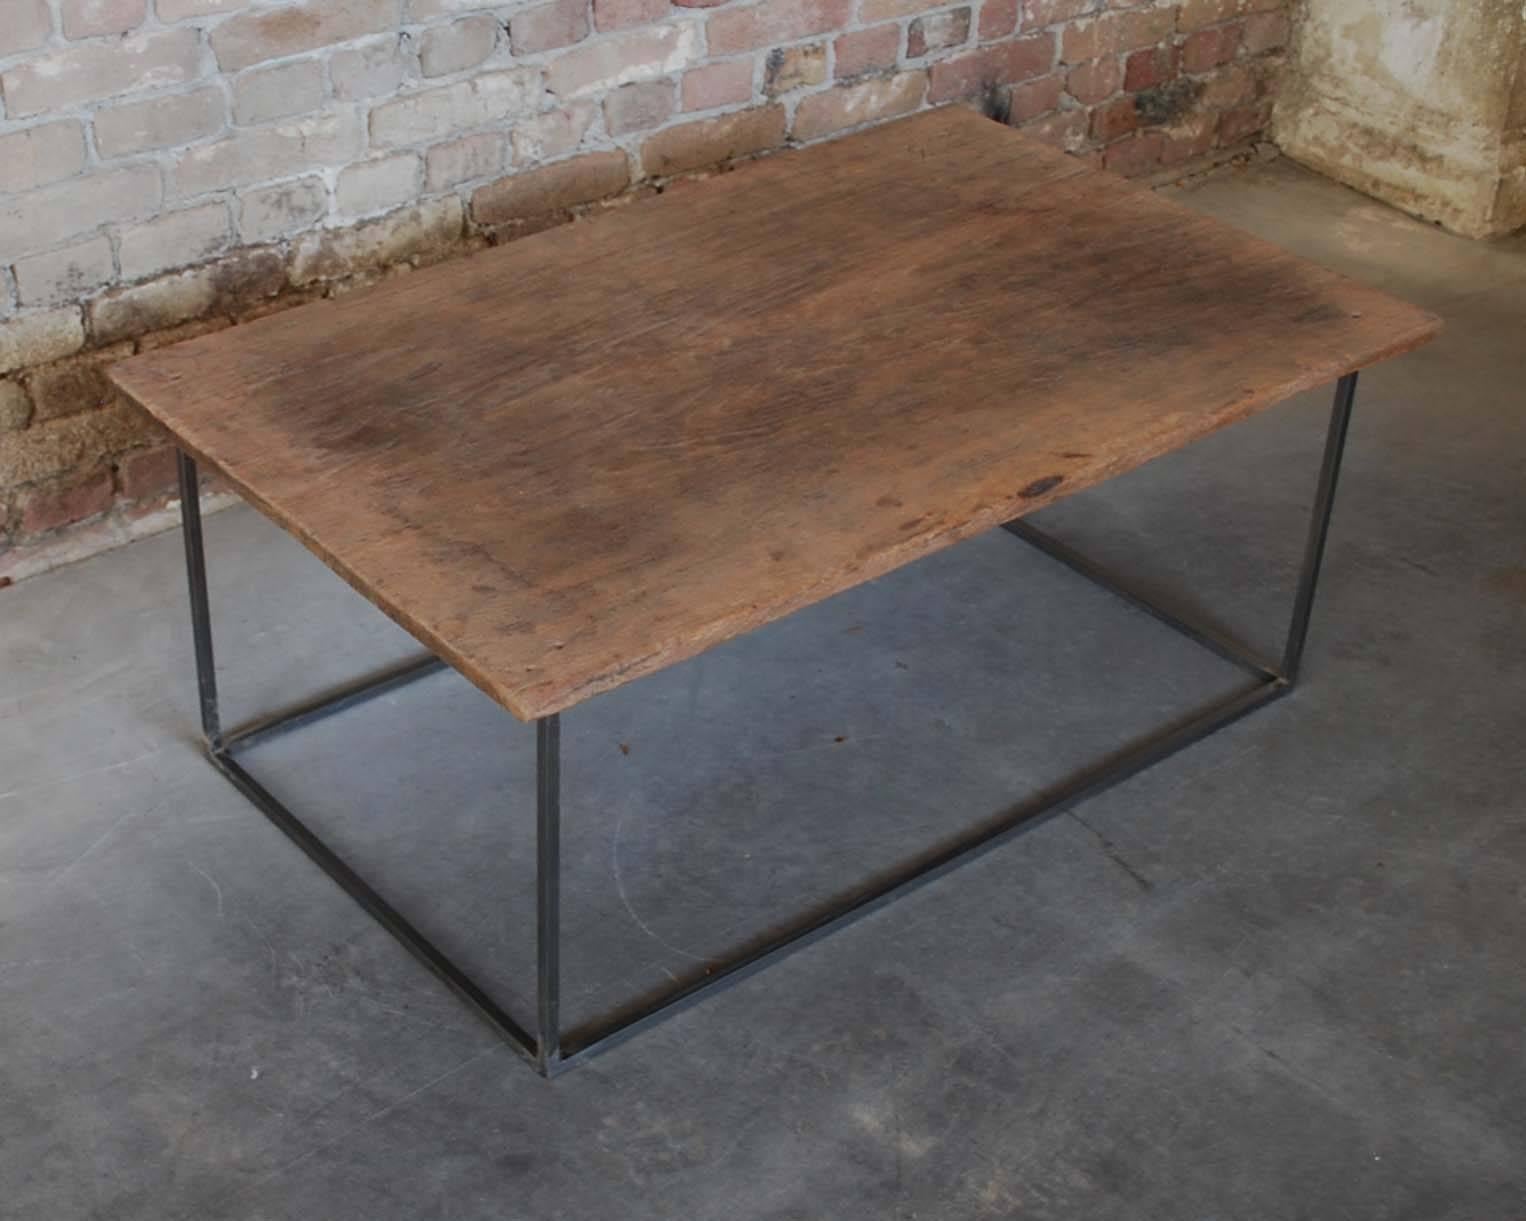 Contemporary coffee table.
Top made from one piece of teak wood, top dating, 1900.
Steel frame.
Originates the Netherlands, dating 2015.
(Shipping costs on request, depends on destination).
     